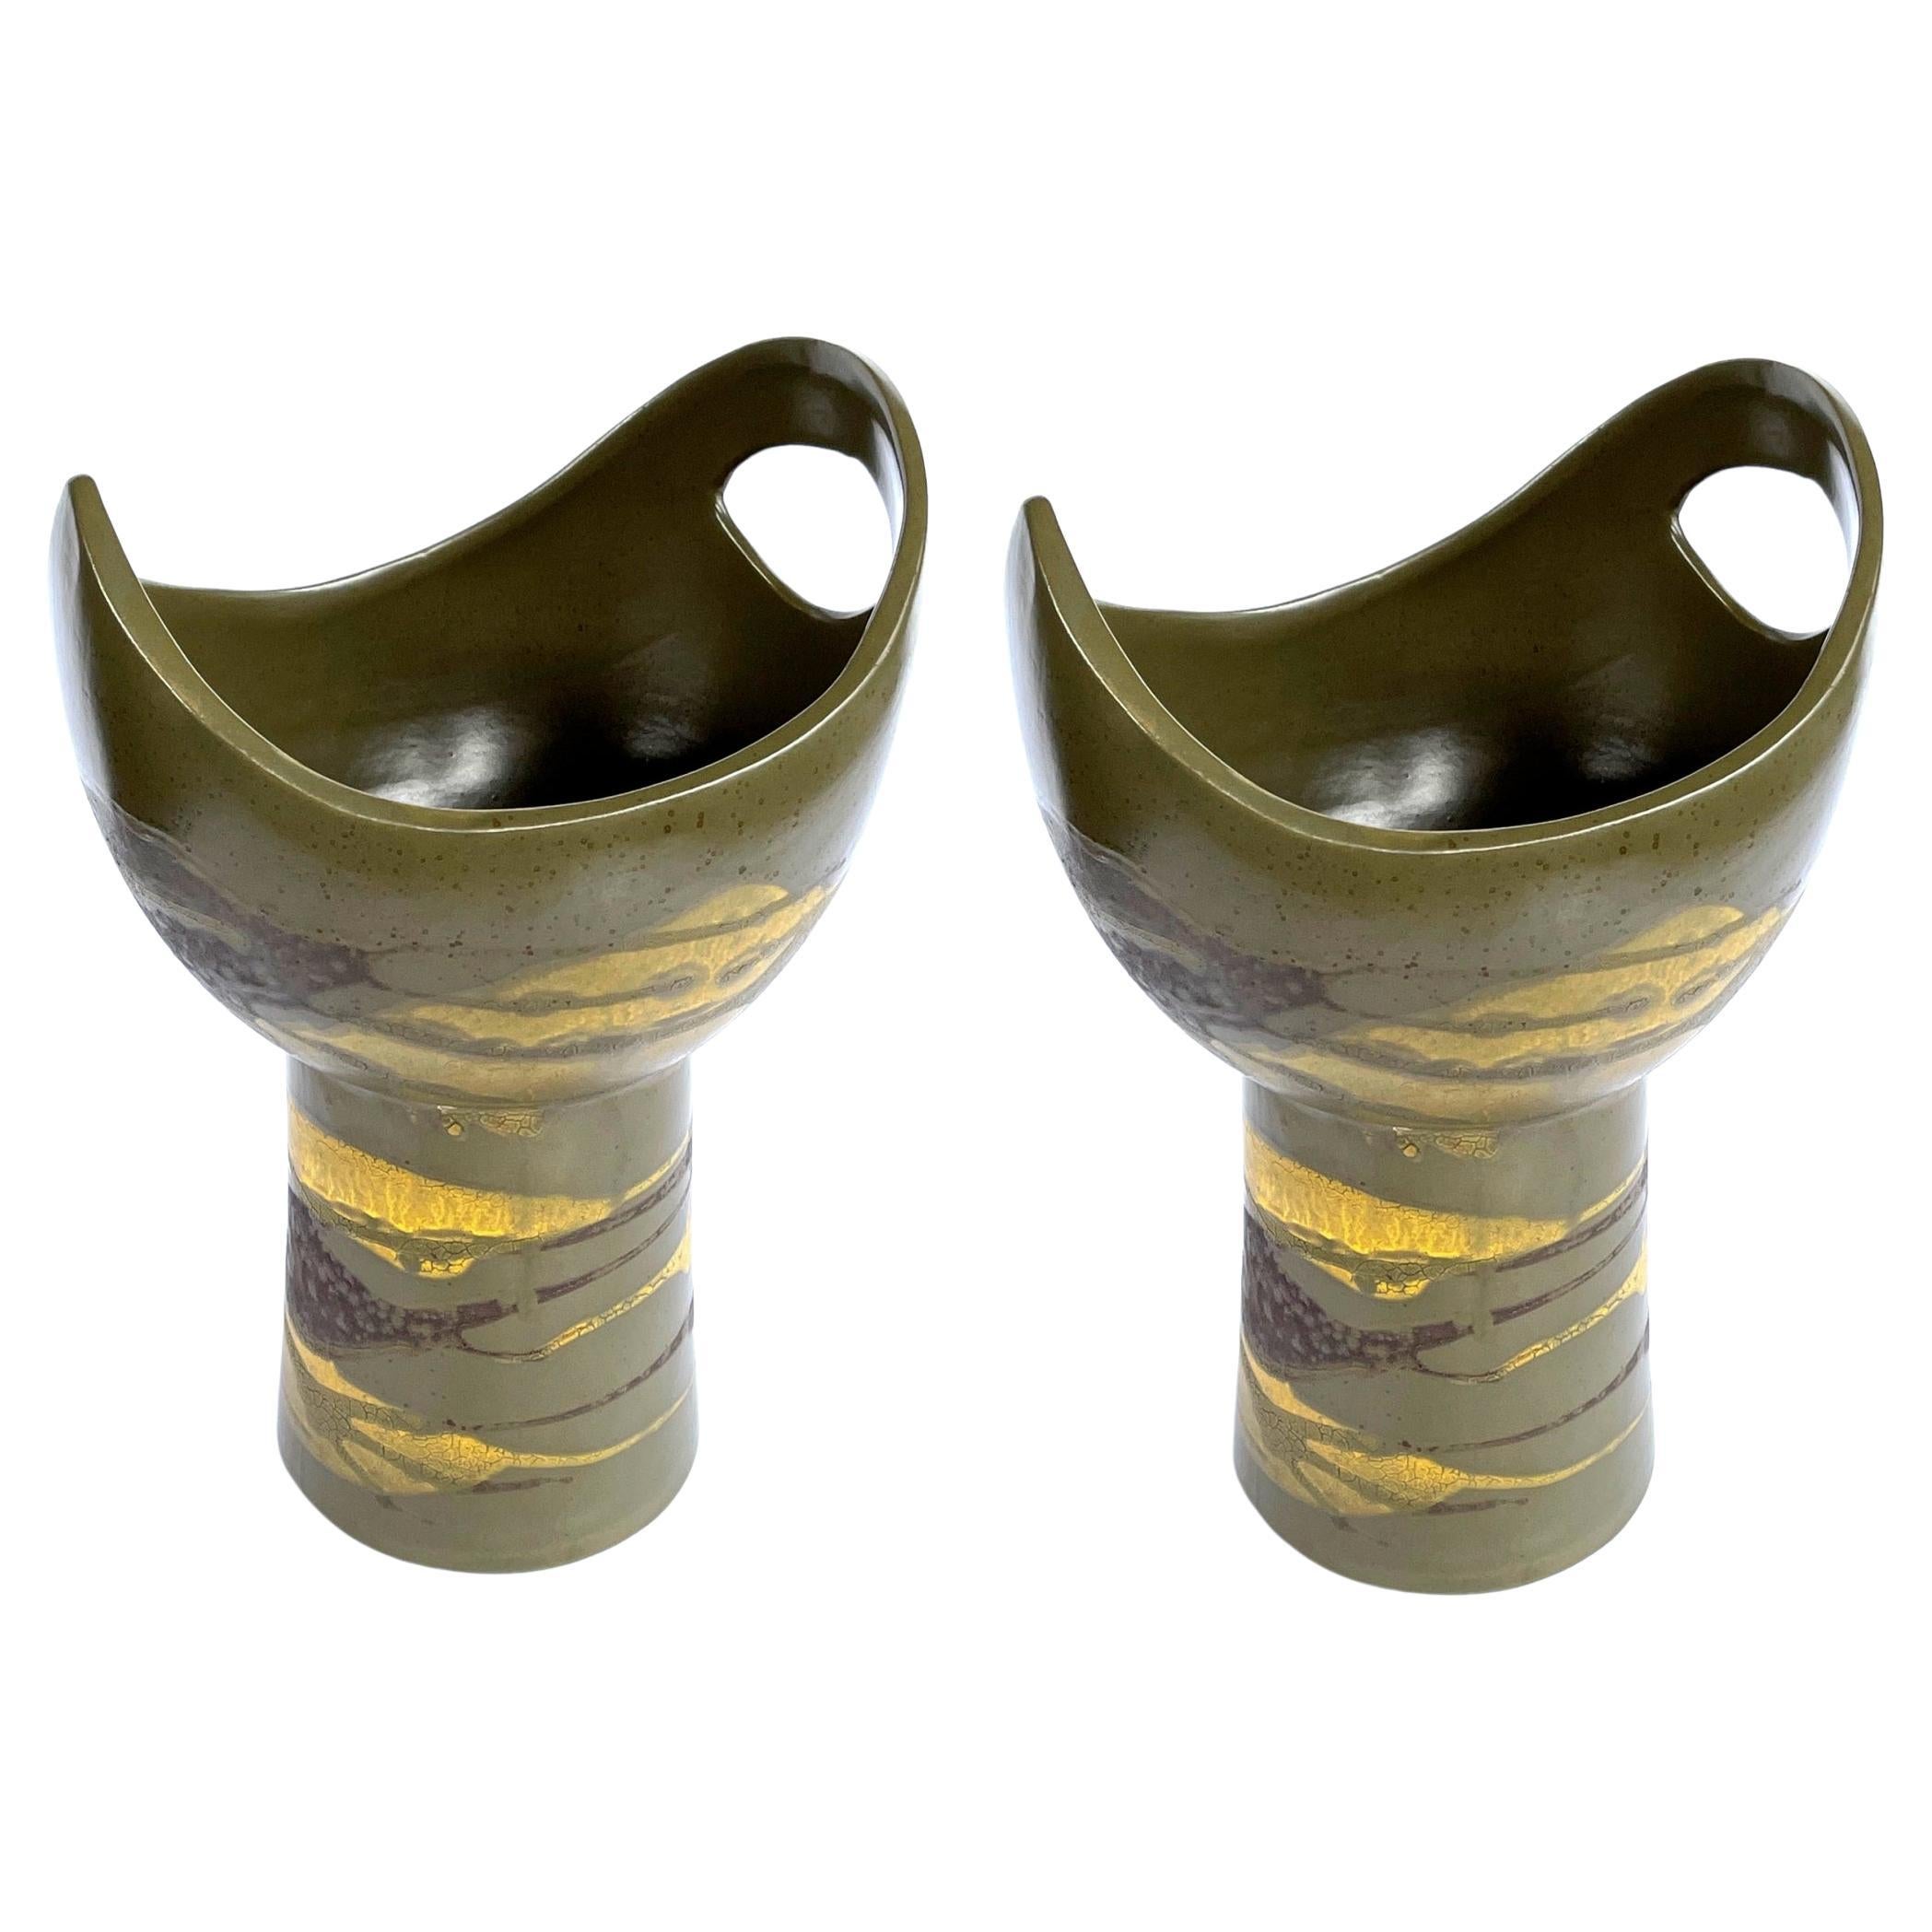 Pr of Royal Haeger Cup-Shaped Vases W Brown & Yellow Glaze on Olive Green Ground